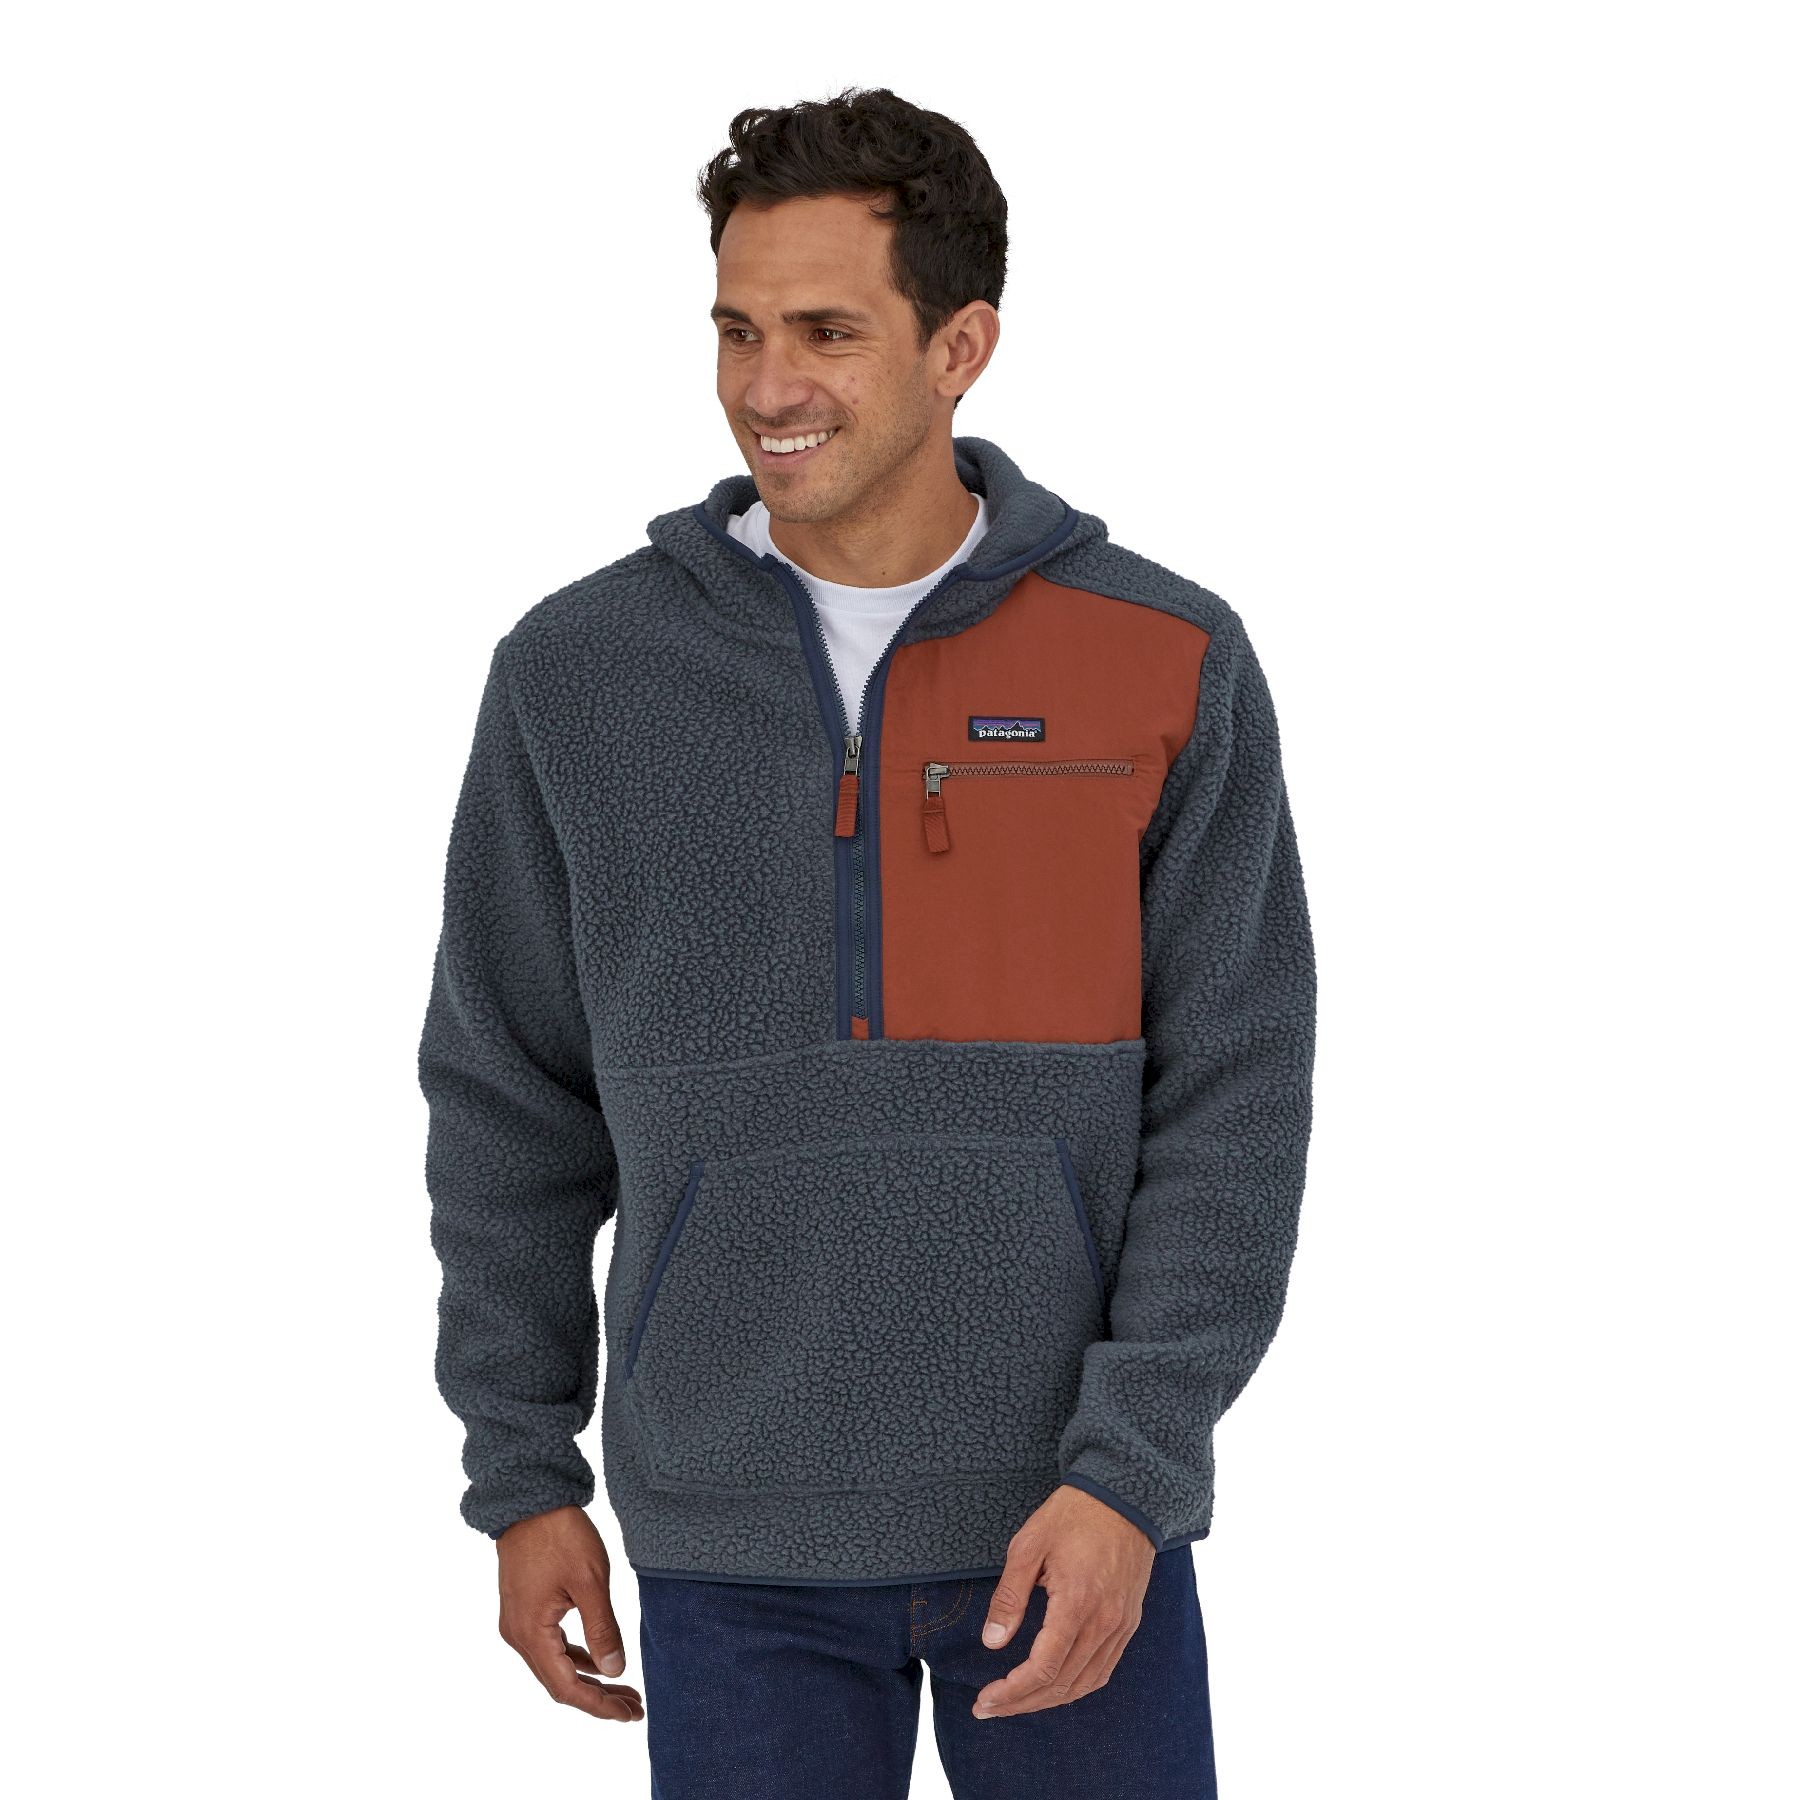 Mens Sweaters and knitwear Patagonia Sweaters and knitwear Patagonia Retro Pile Fleece Pullover in Brown Save 20% Blue for Men 